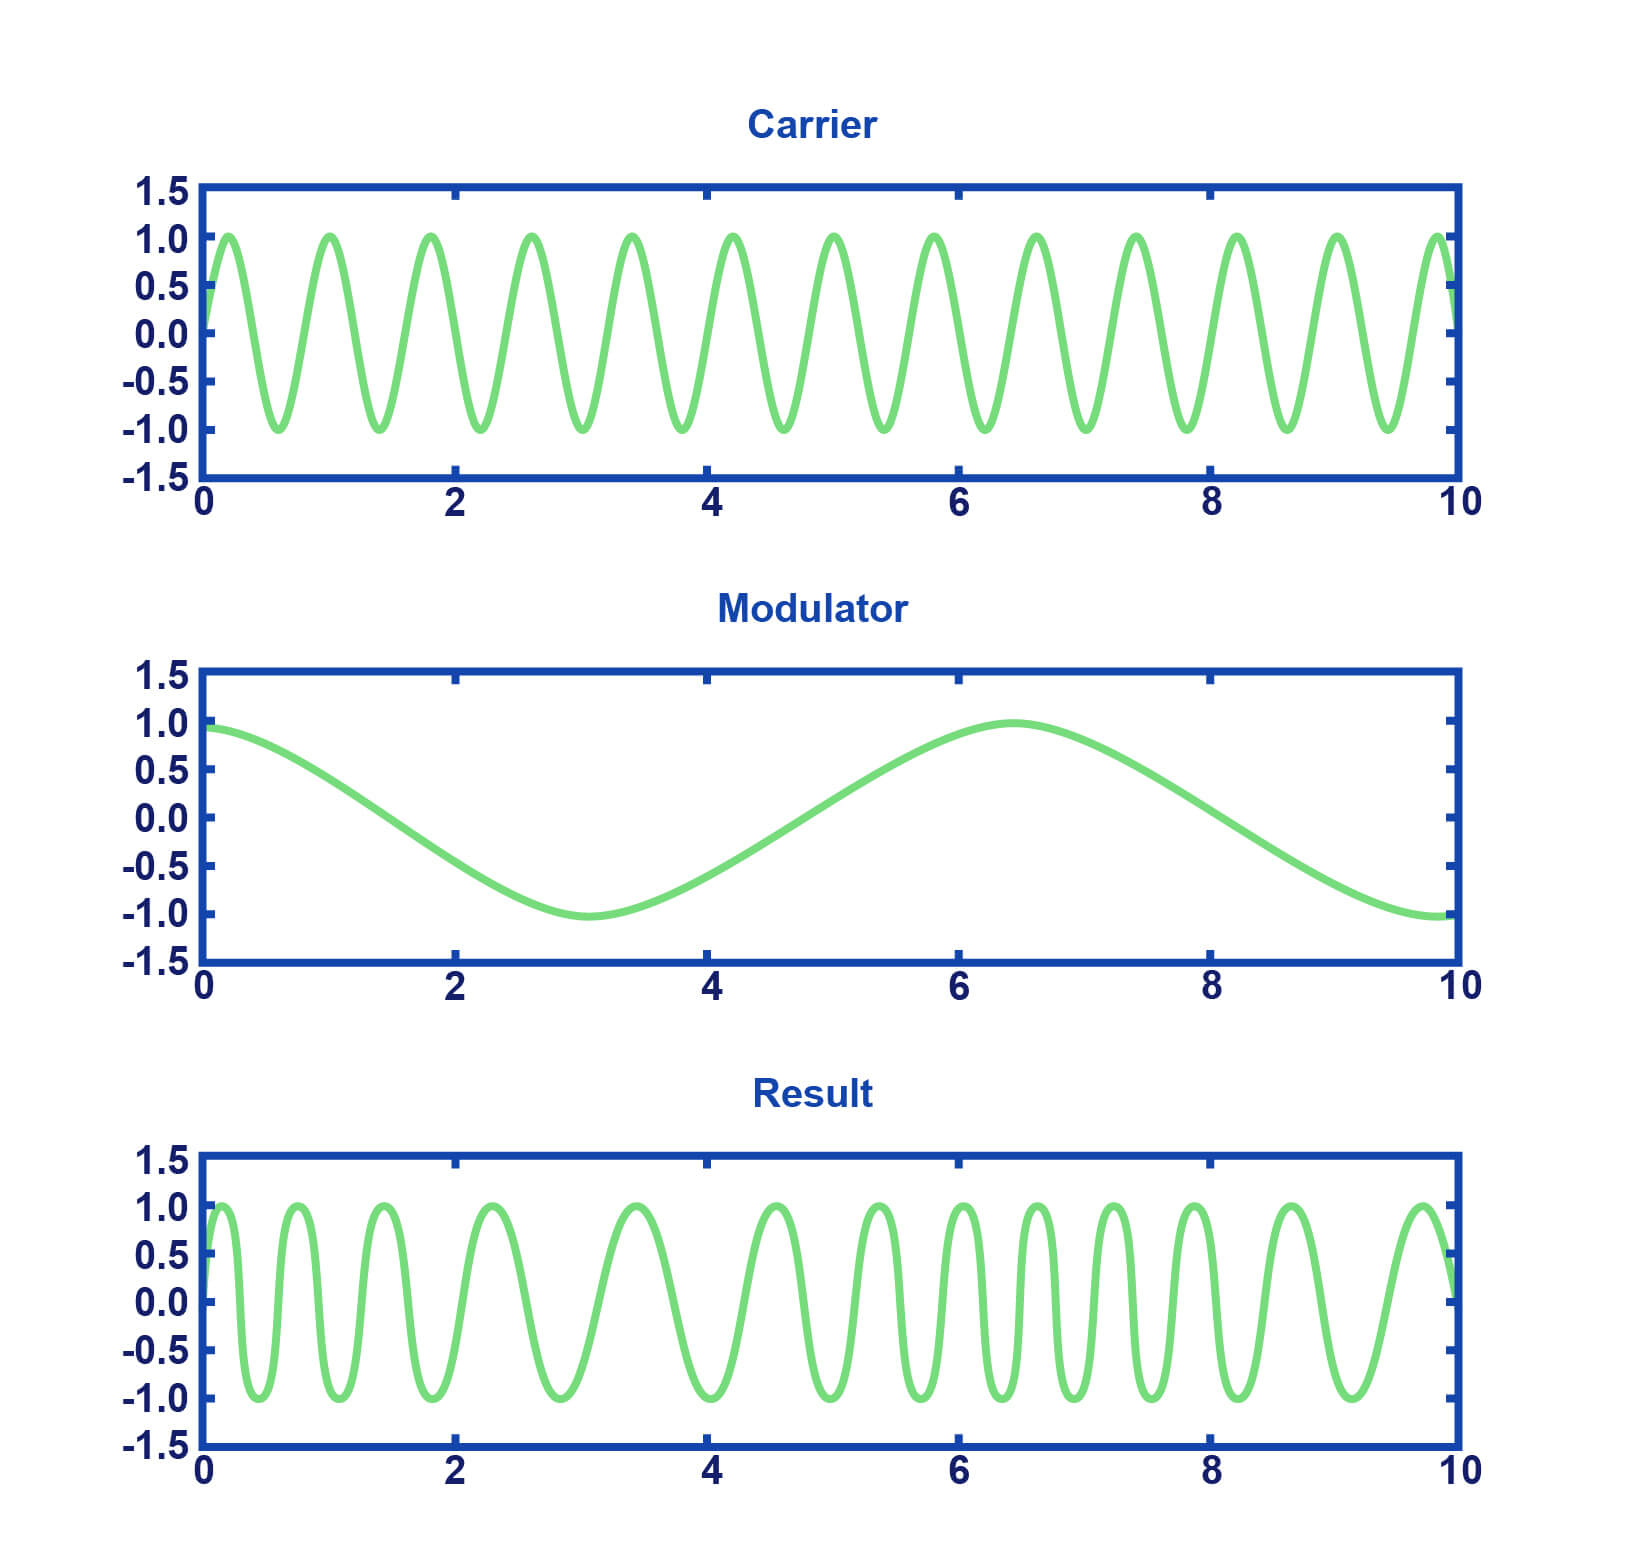 Frequency modulation entails using the frequency of one signal to modulate the other.

In practice, one signal is called the "carrier" while the other is called the "modulator".

You can modulate the frequency of of the carrier signal with the frequency of the modulator.  